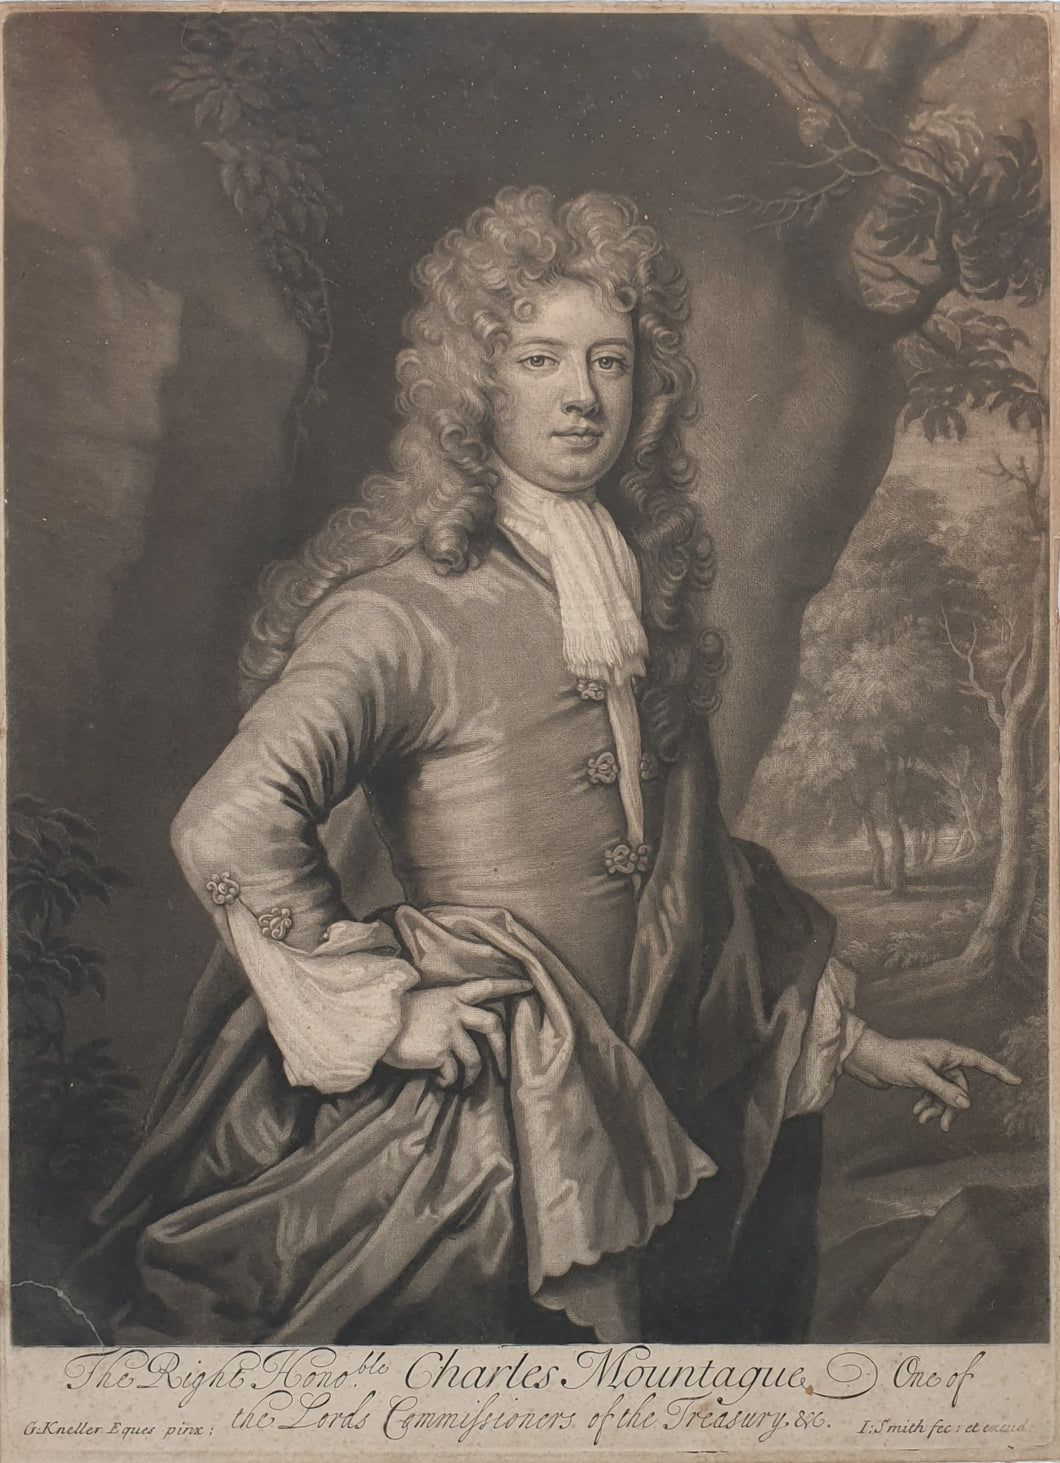 JI Smith Mezzotint Engraving After G Kneller The Right Honourable Charles Mountague Circa. 1690.